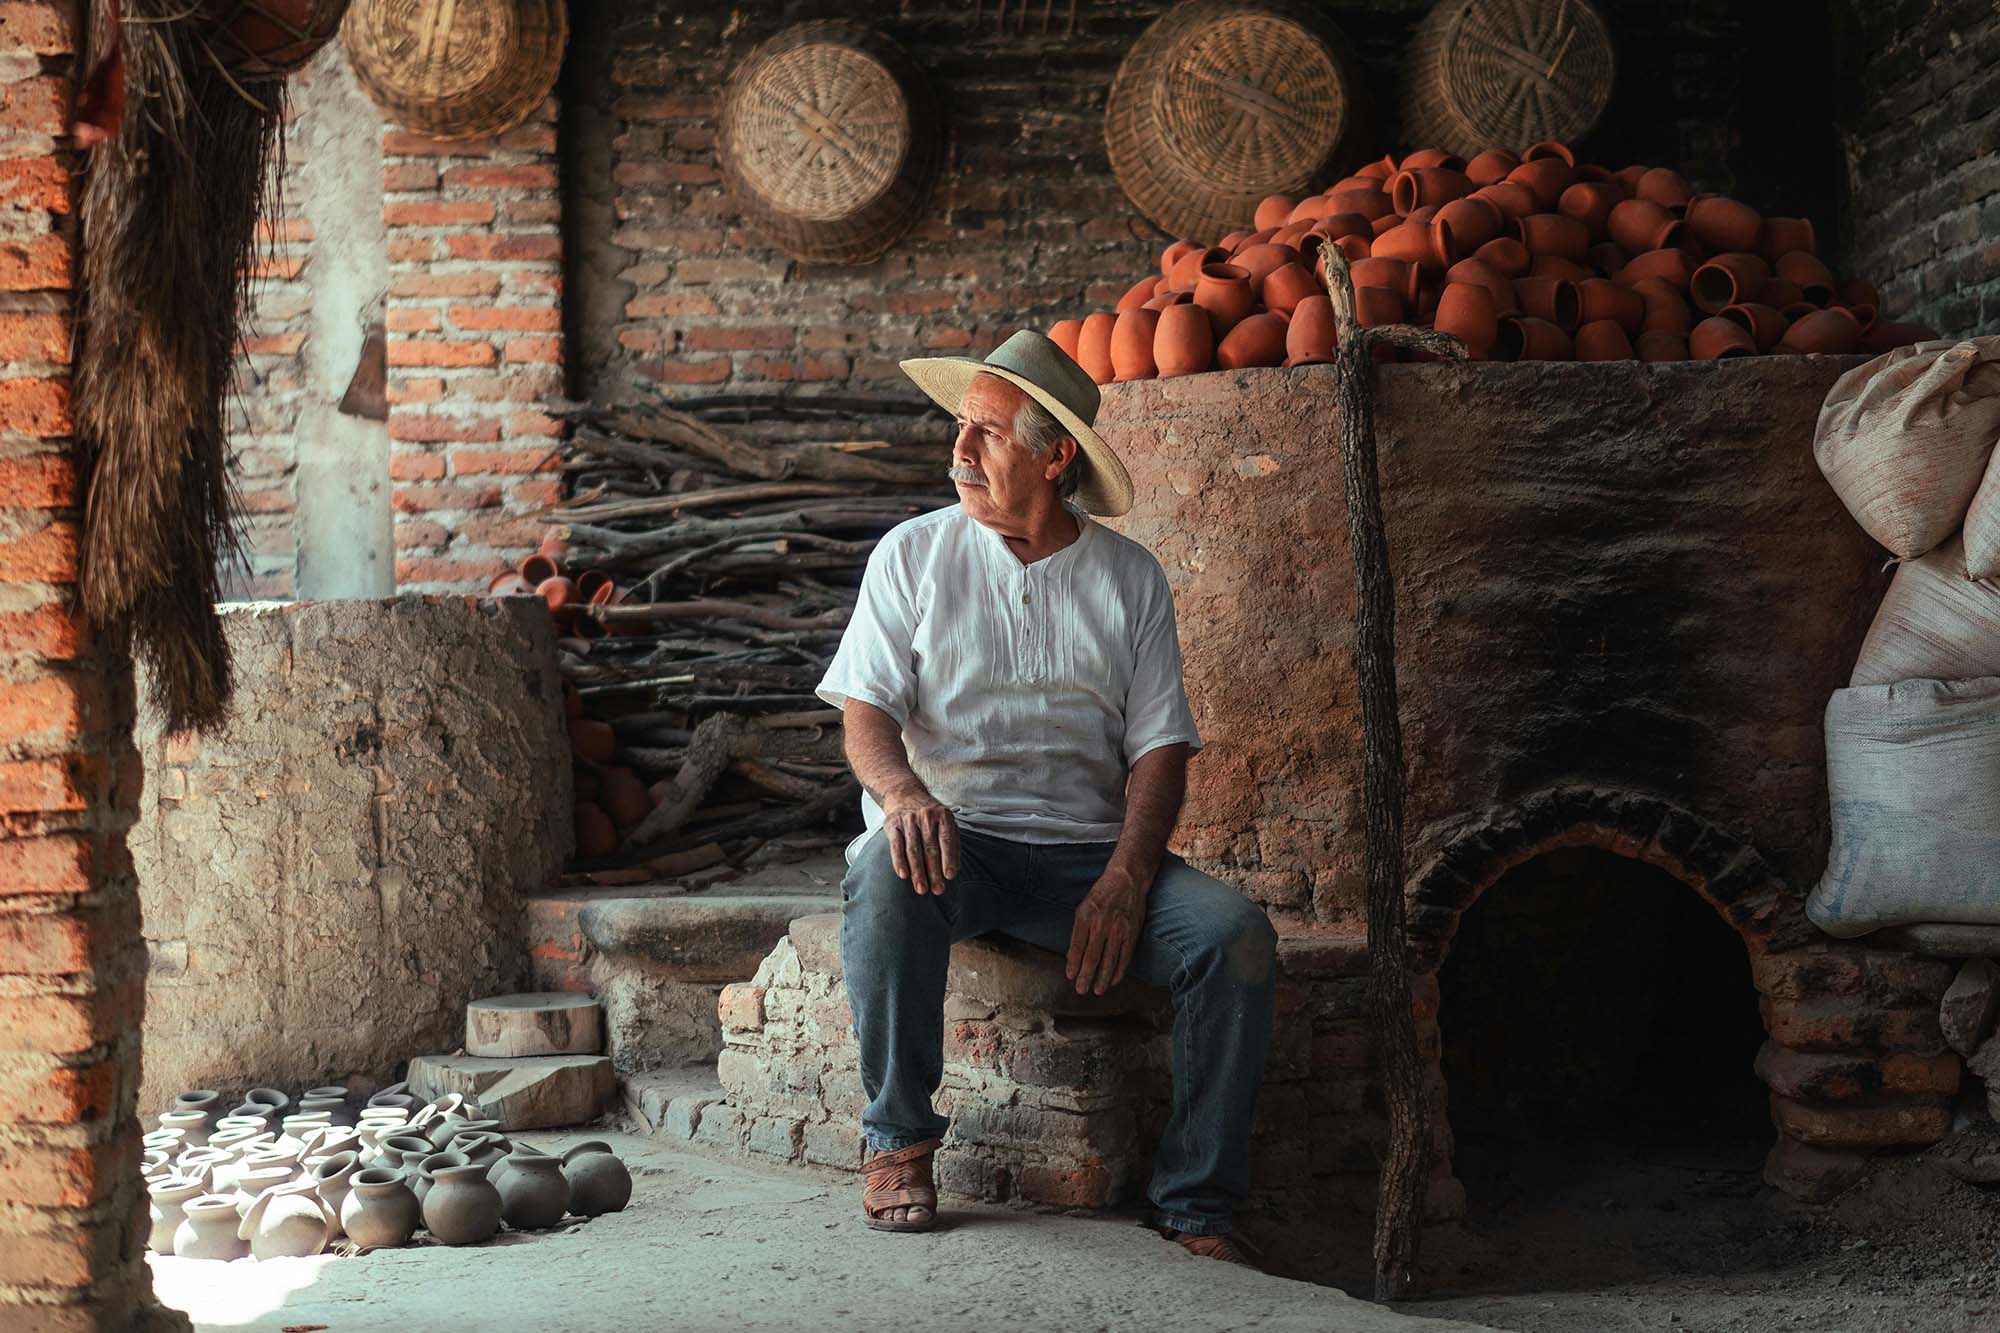 Background image showing man in front of his traditional business